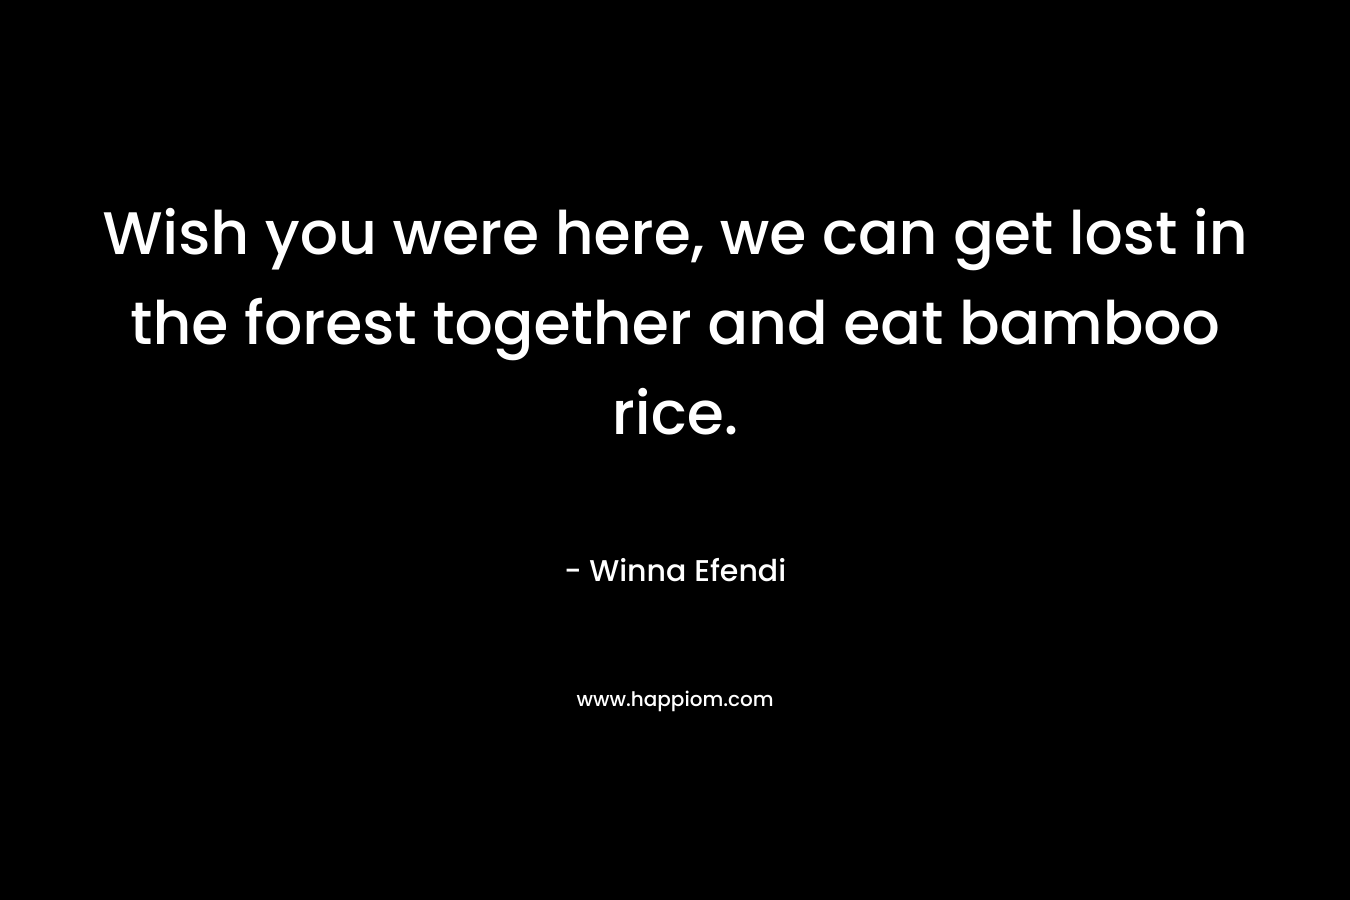 Wish you were here, we can get lost in the forest together and eat bamboo rice.